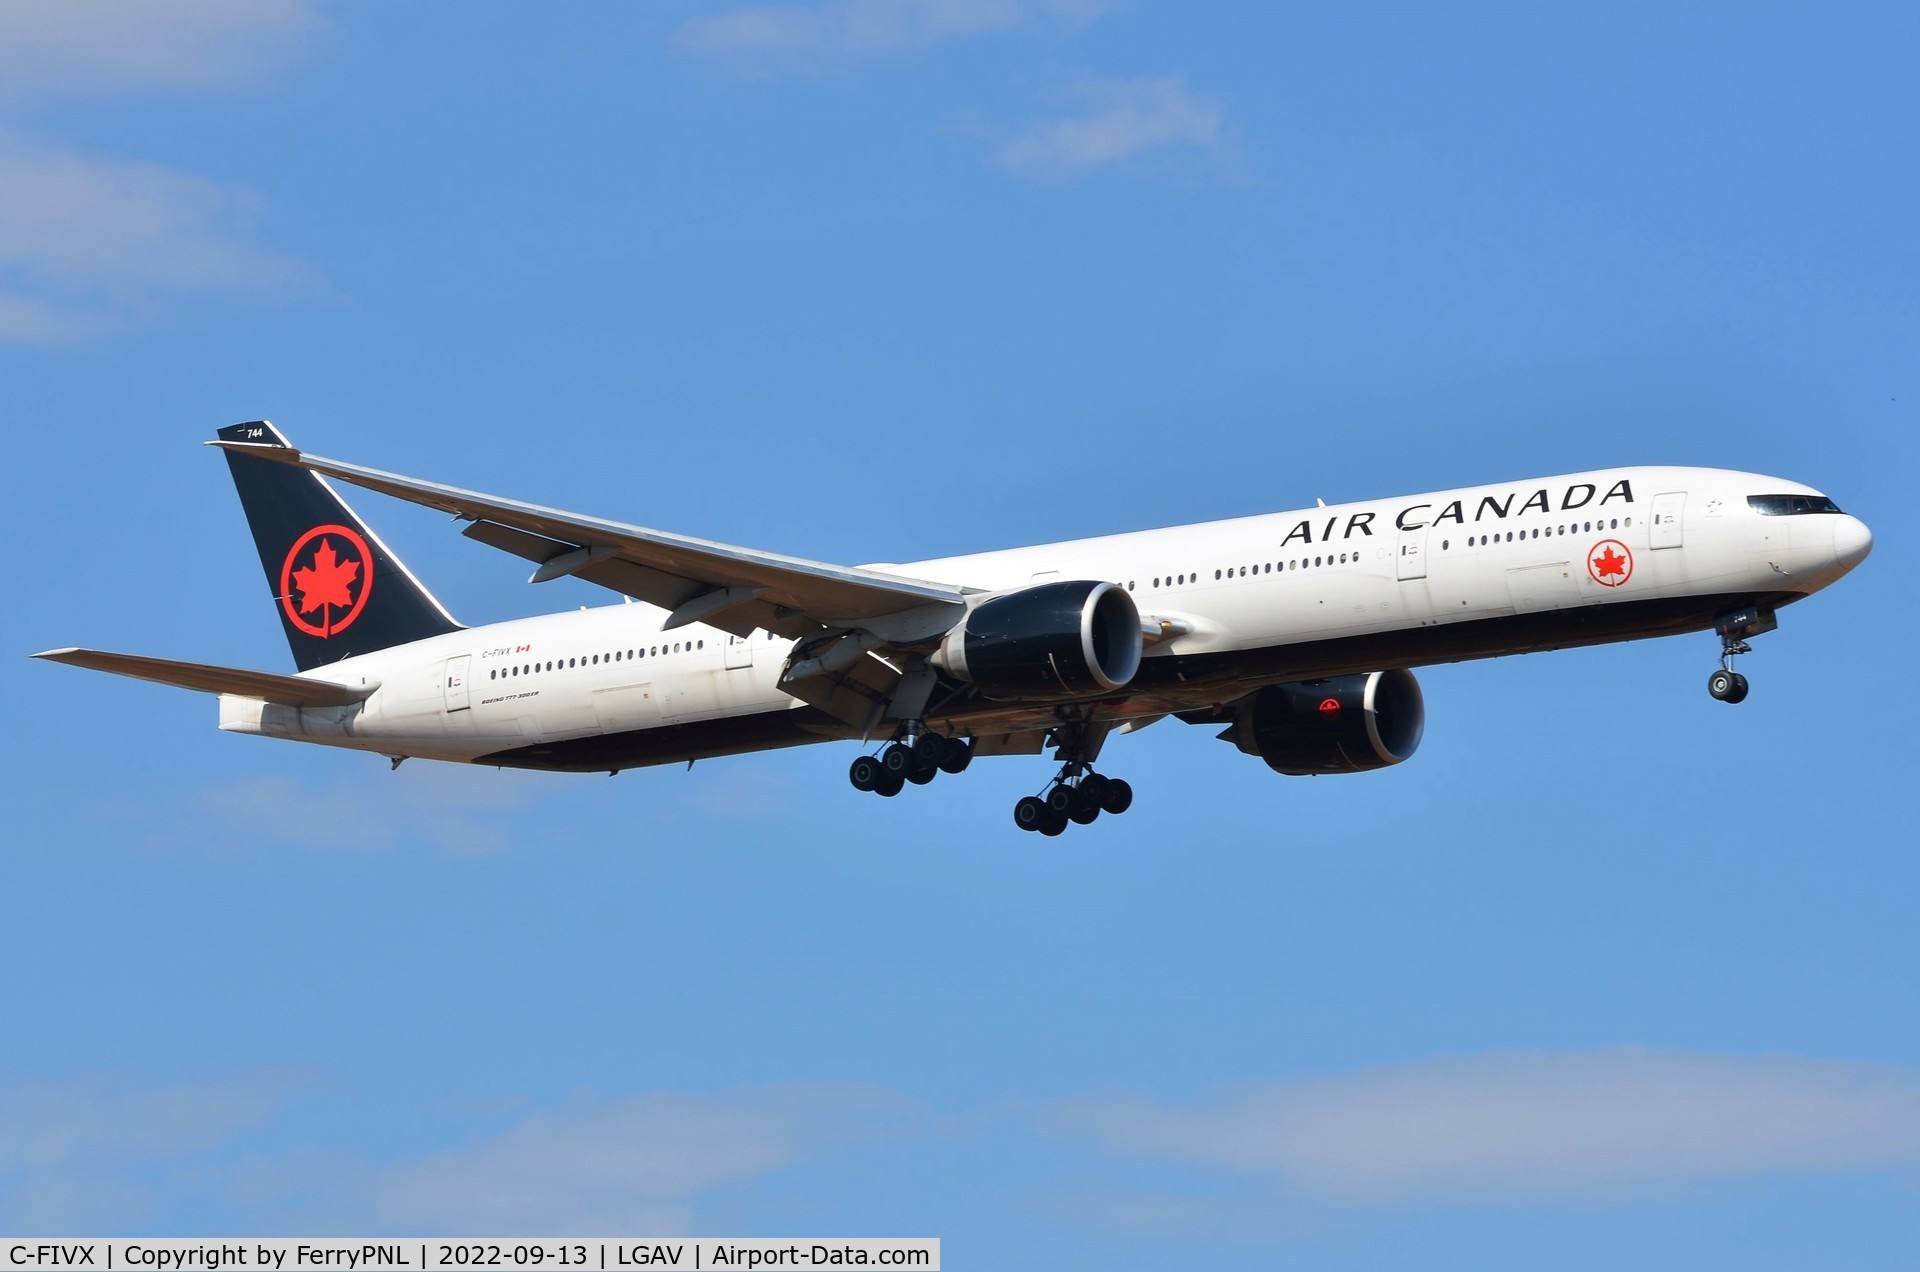 C-FIVX, 2013 Boeing 777-333/ER C/N 42219, Arrival of one of two daily Air Canada B773's